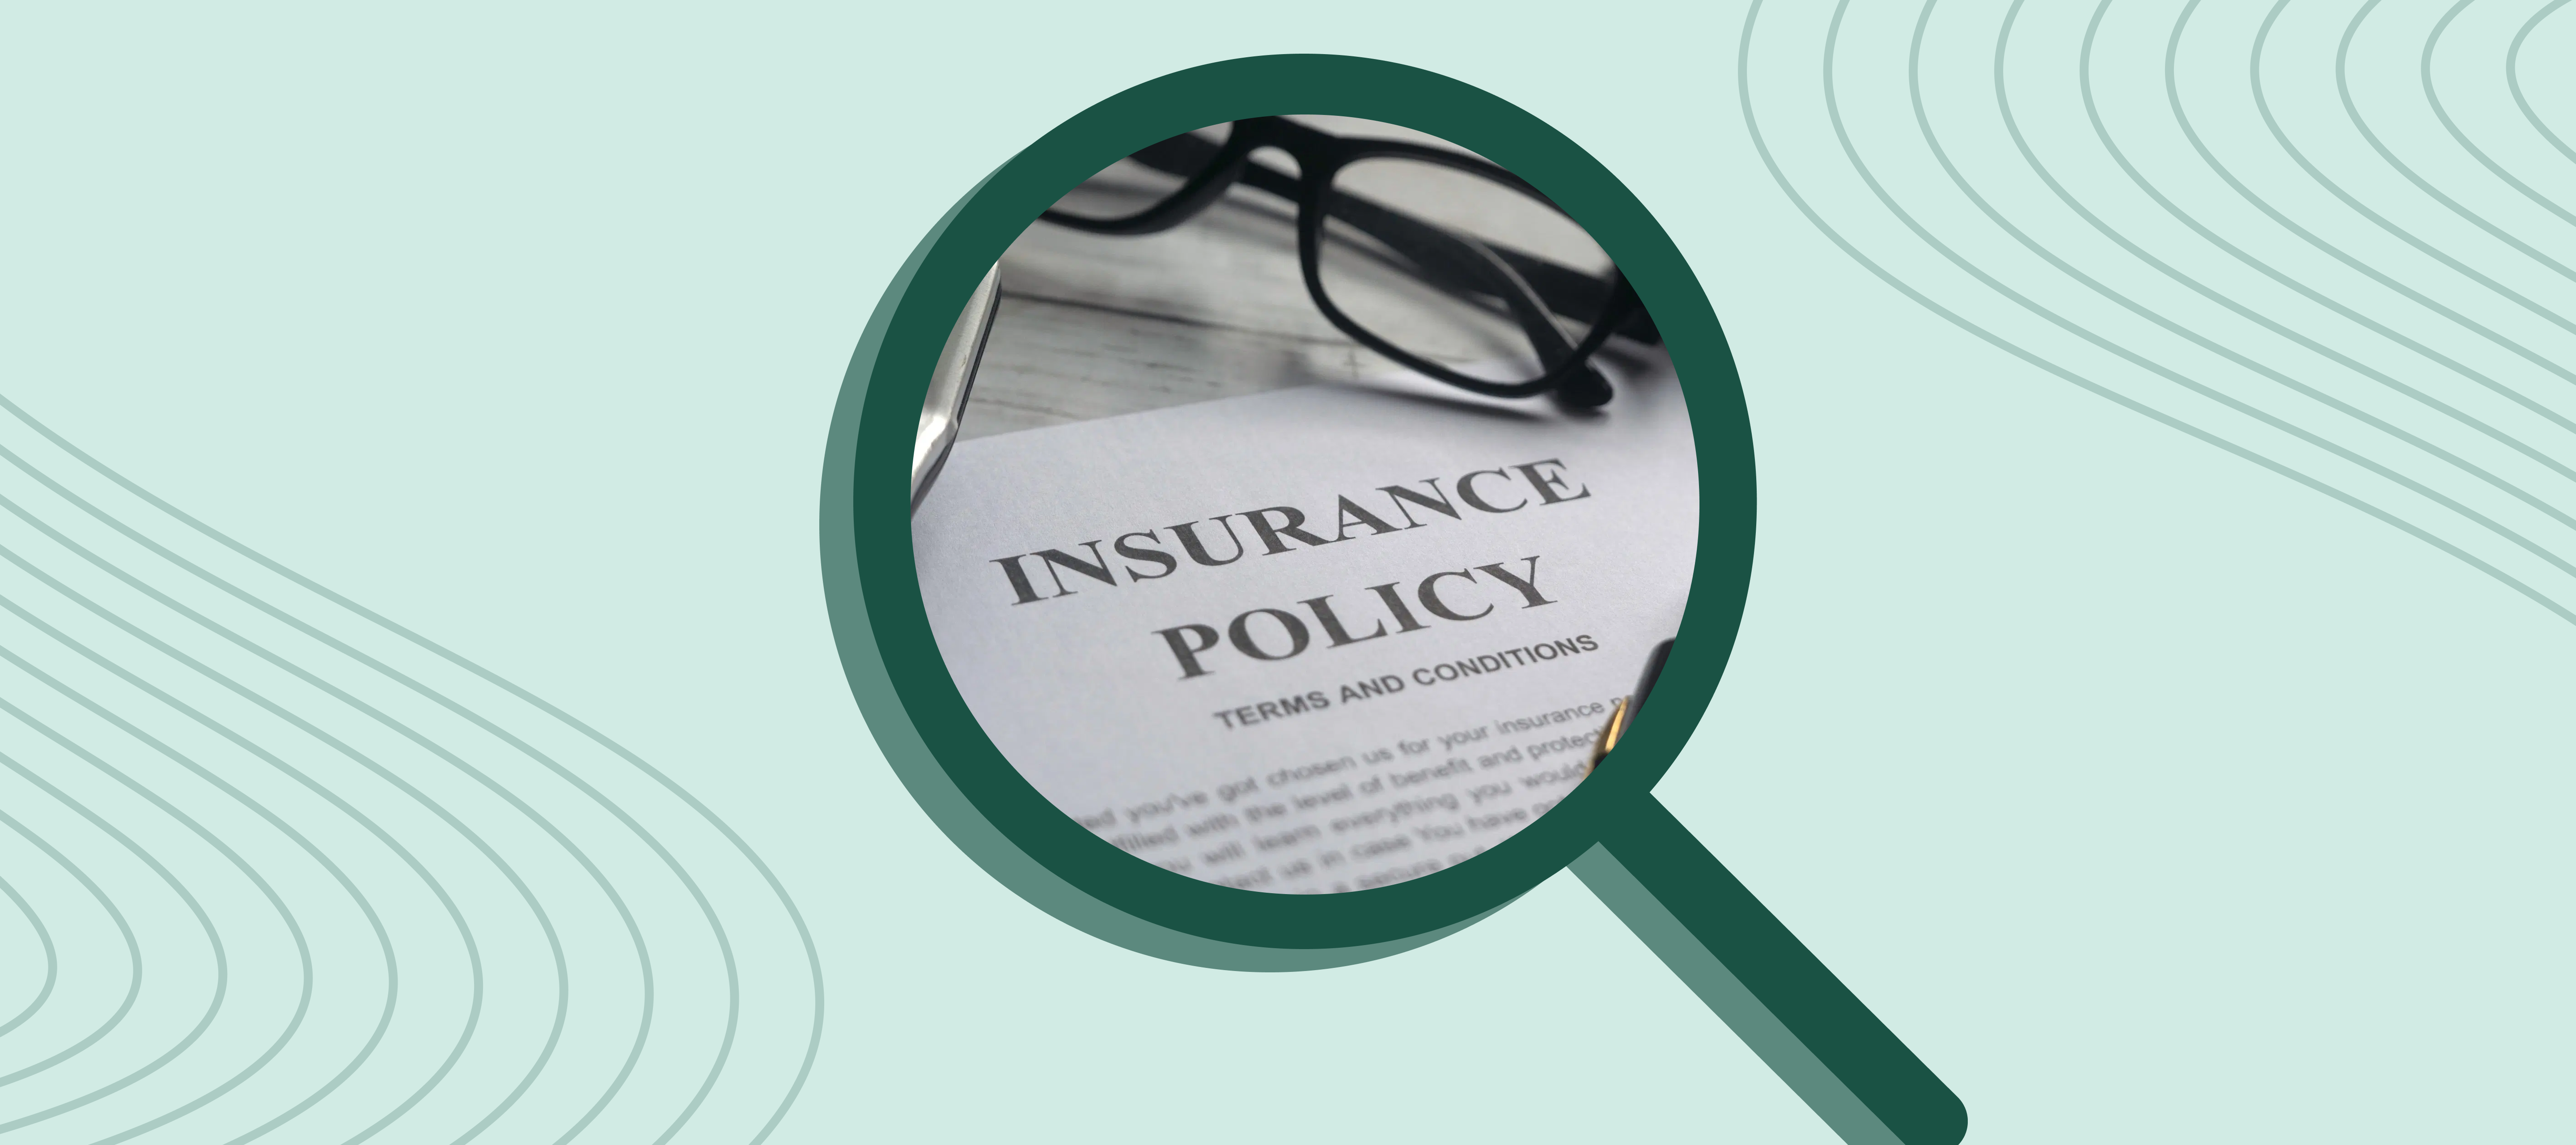 The case for OCR in Insurance Compliance – Is 98% good enough?